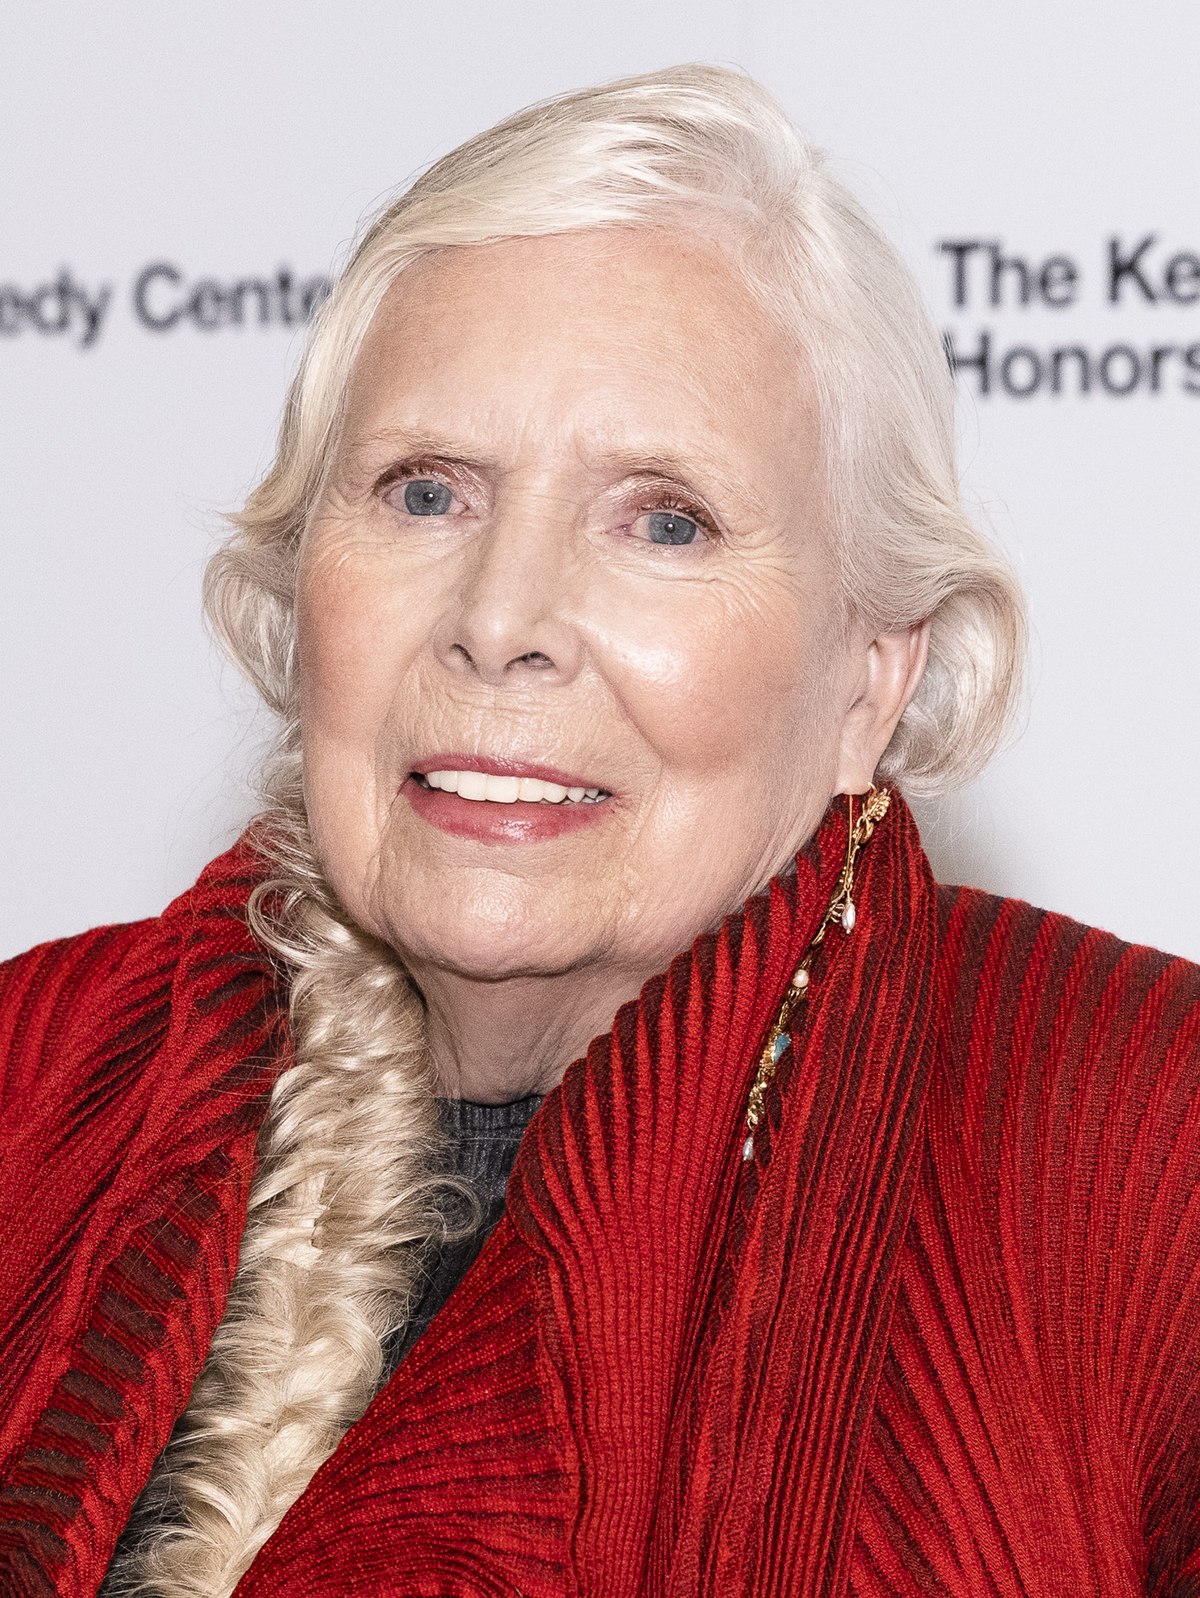 How was Joni Mitchell personal life